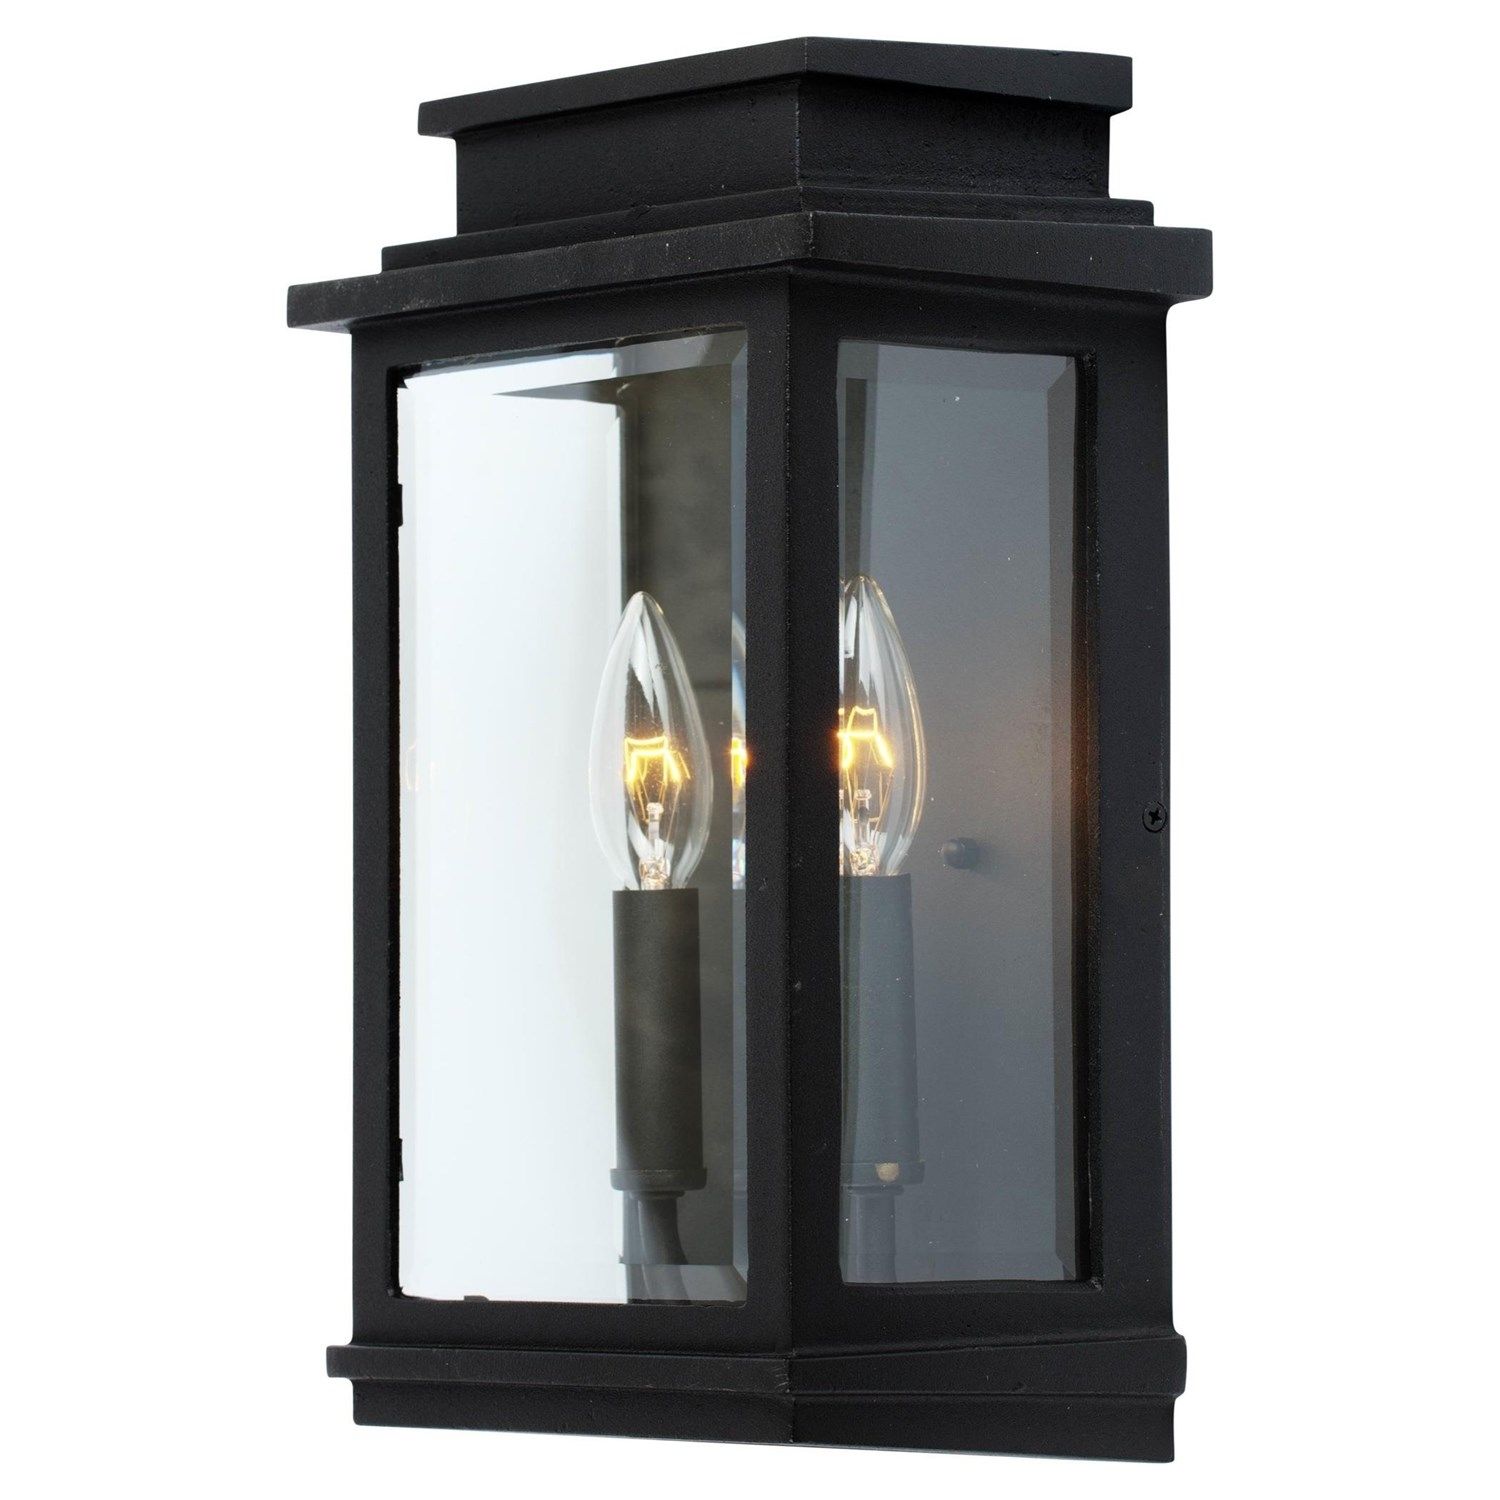 Artcraft Ac8391 Fremont 13 1 2 2 Light Outdoor Wall Sconce Pertaining To Arts And Crafts Outdoor Wall Lighting (View 12 of 15)